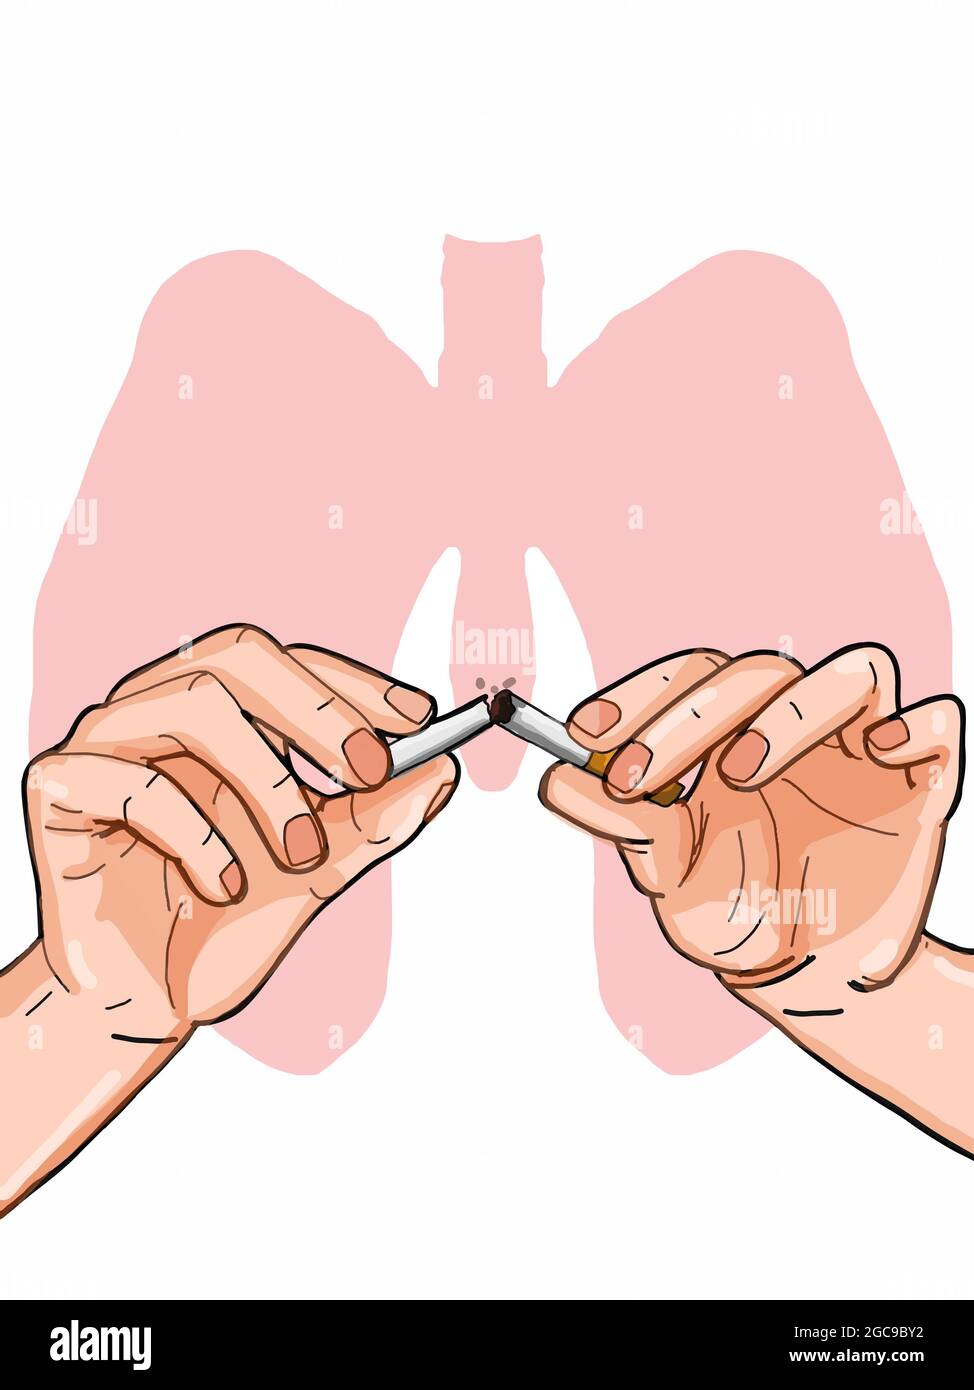 Dividing the cigarette into two hands lungs ,stop smoking Stock Photo